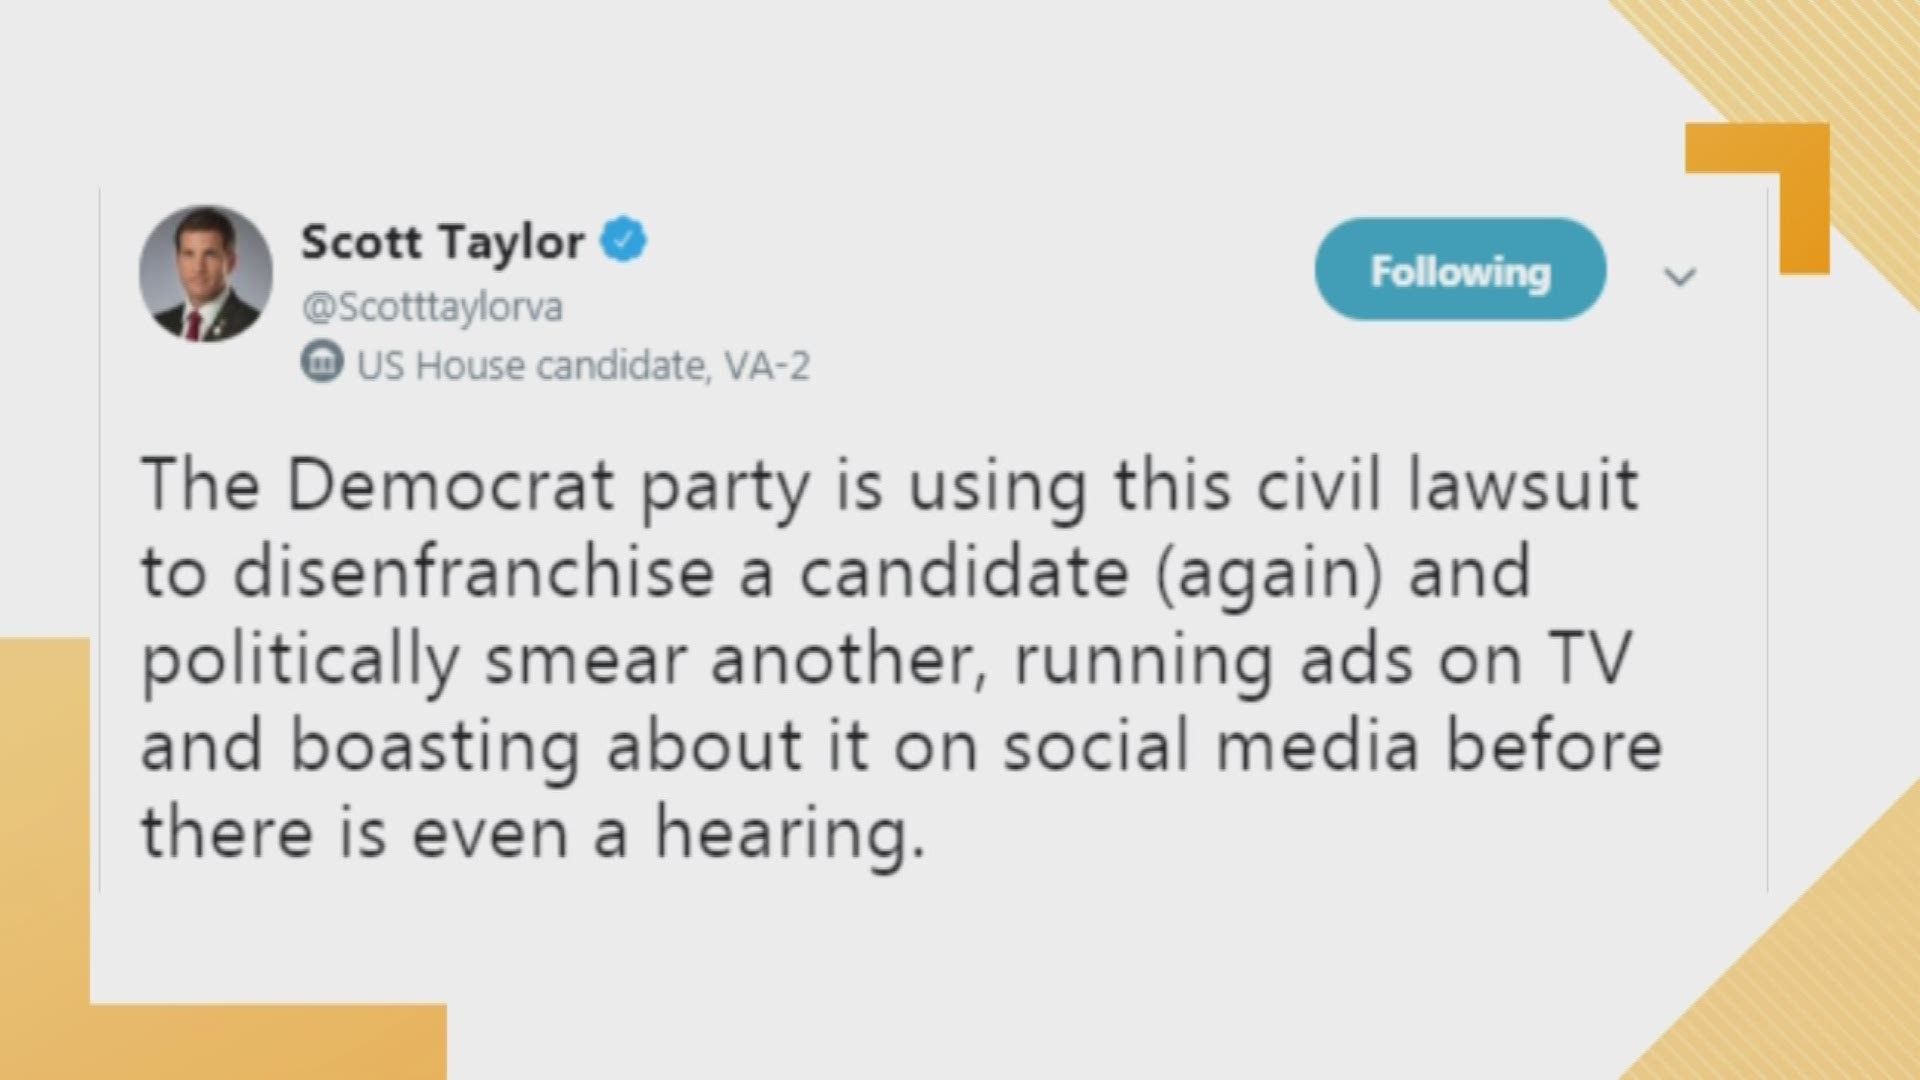 U.S. Rep. Scott Taylor has been subpoenaed to testify in a lawsuit that accuses members of his campaign staff of forging signatures to help an independent candidate get on the ballot for the 2nd Congressional District.